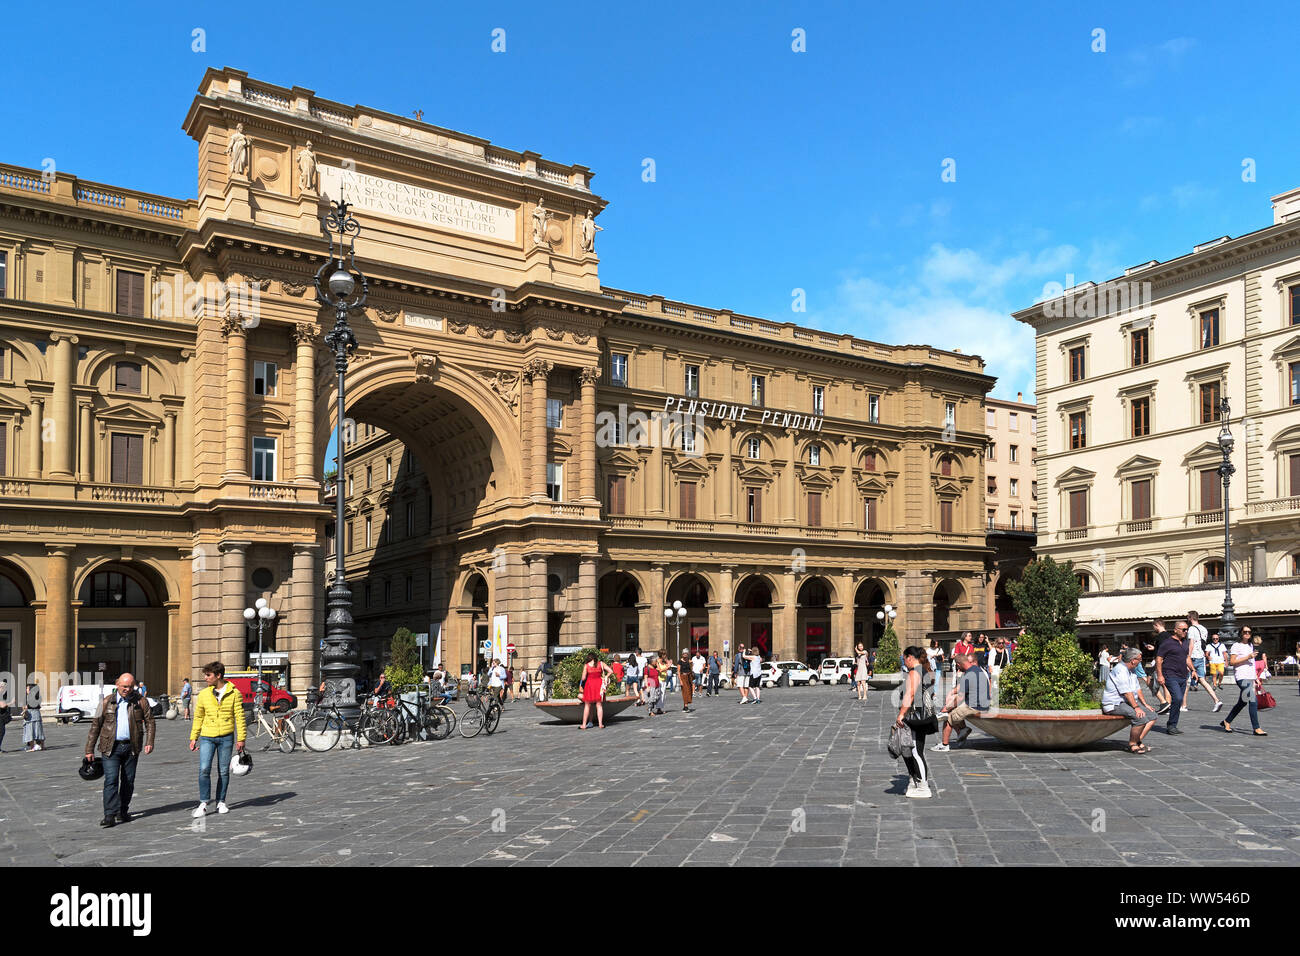 The arch of triumph on the piazza della republica in the city of florence, tuscany, italy. Stock Photo